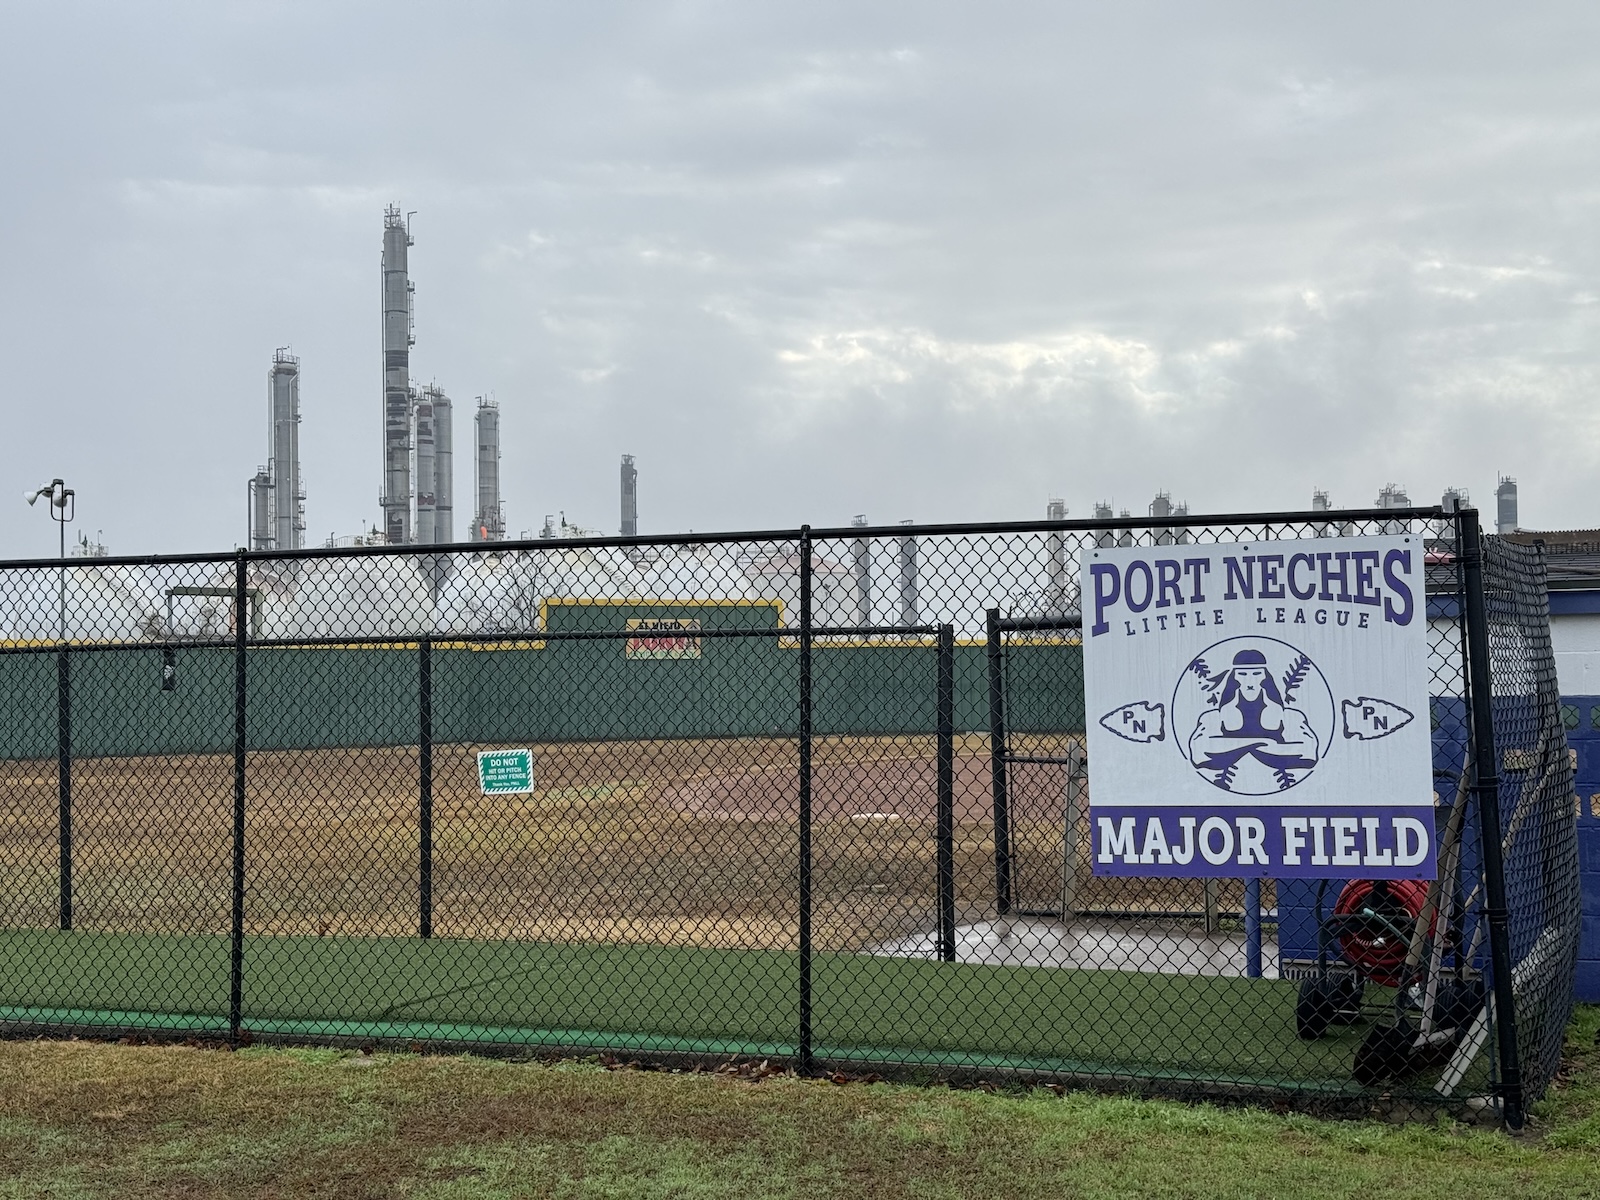 Sign reading "Port Neches Little League Major Field" in foreground with petrochemical complex in background